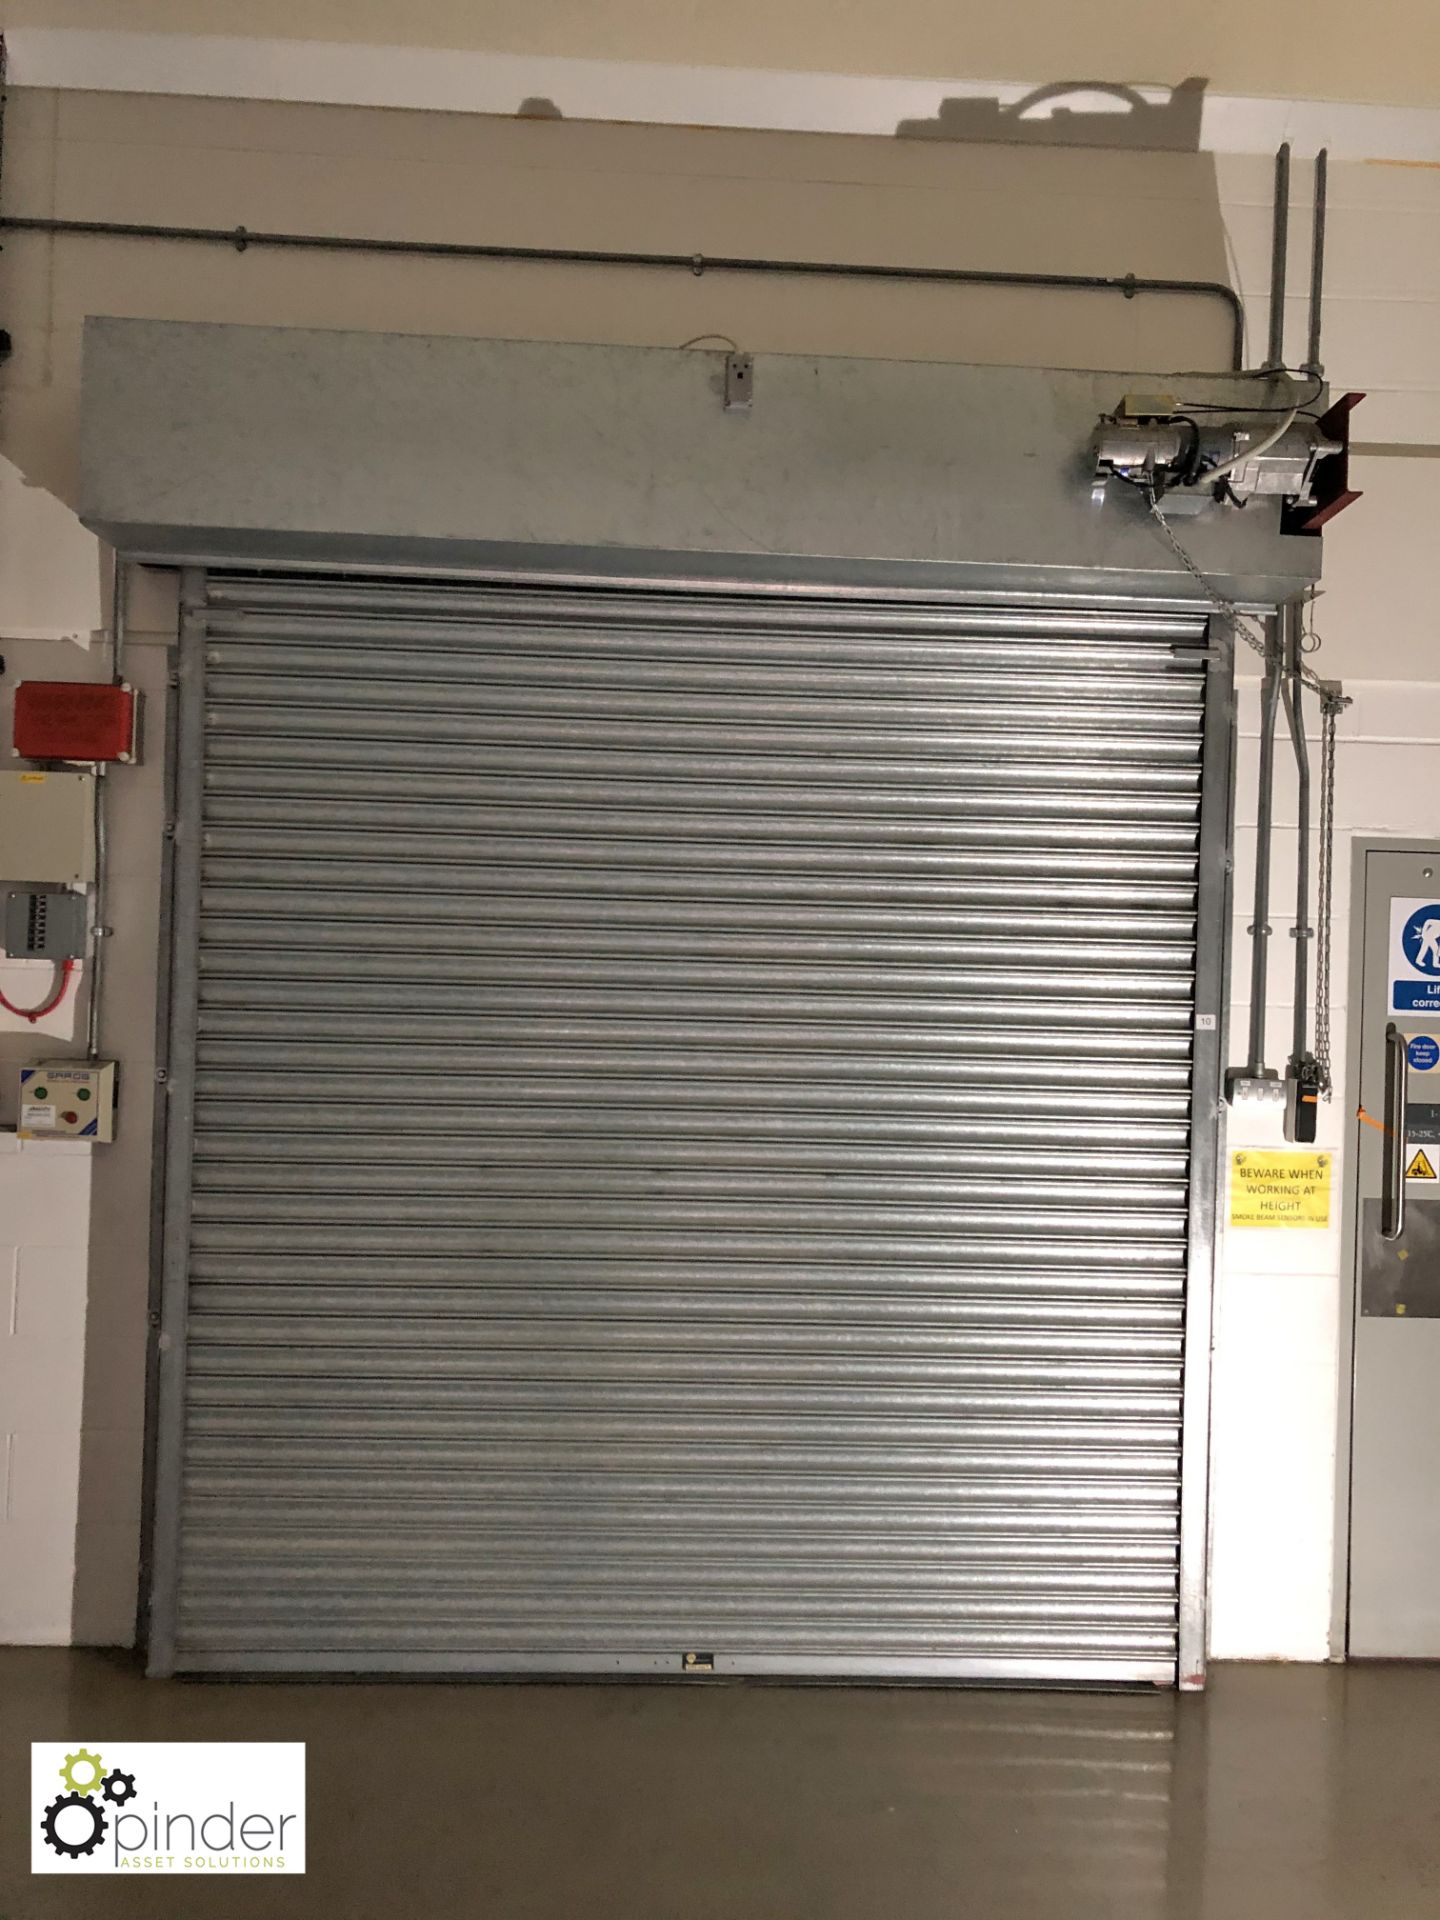 Roller Shutter Door, 2500mm wide x 2500mm high, with Garog auto control system (please note there is